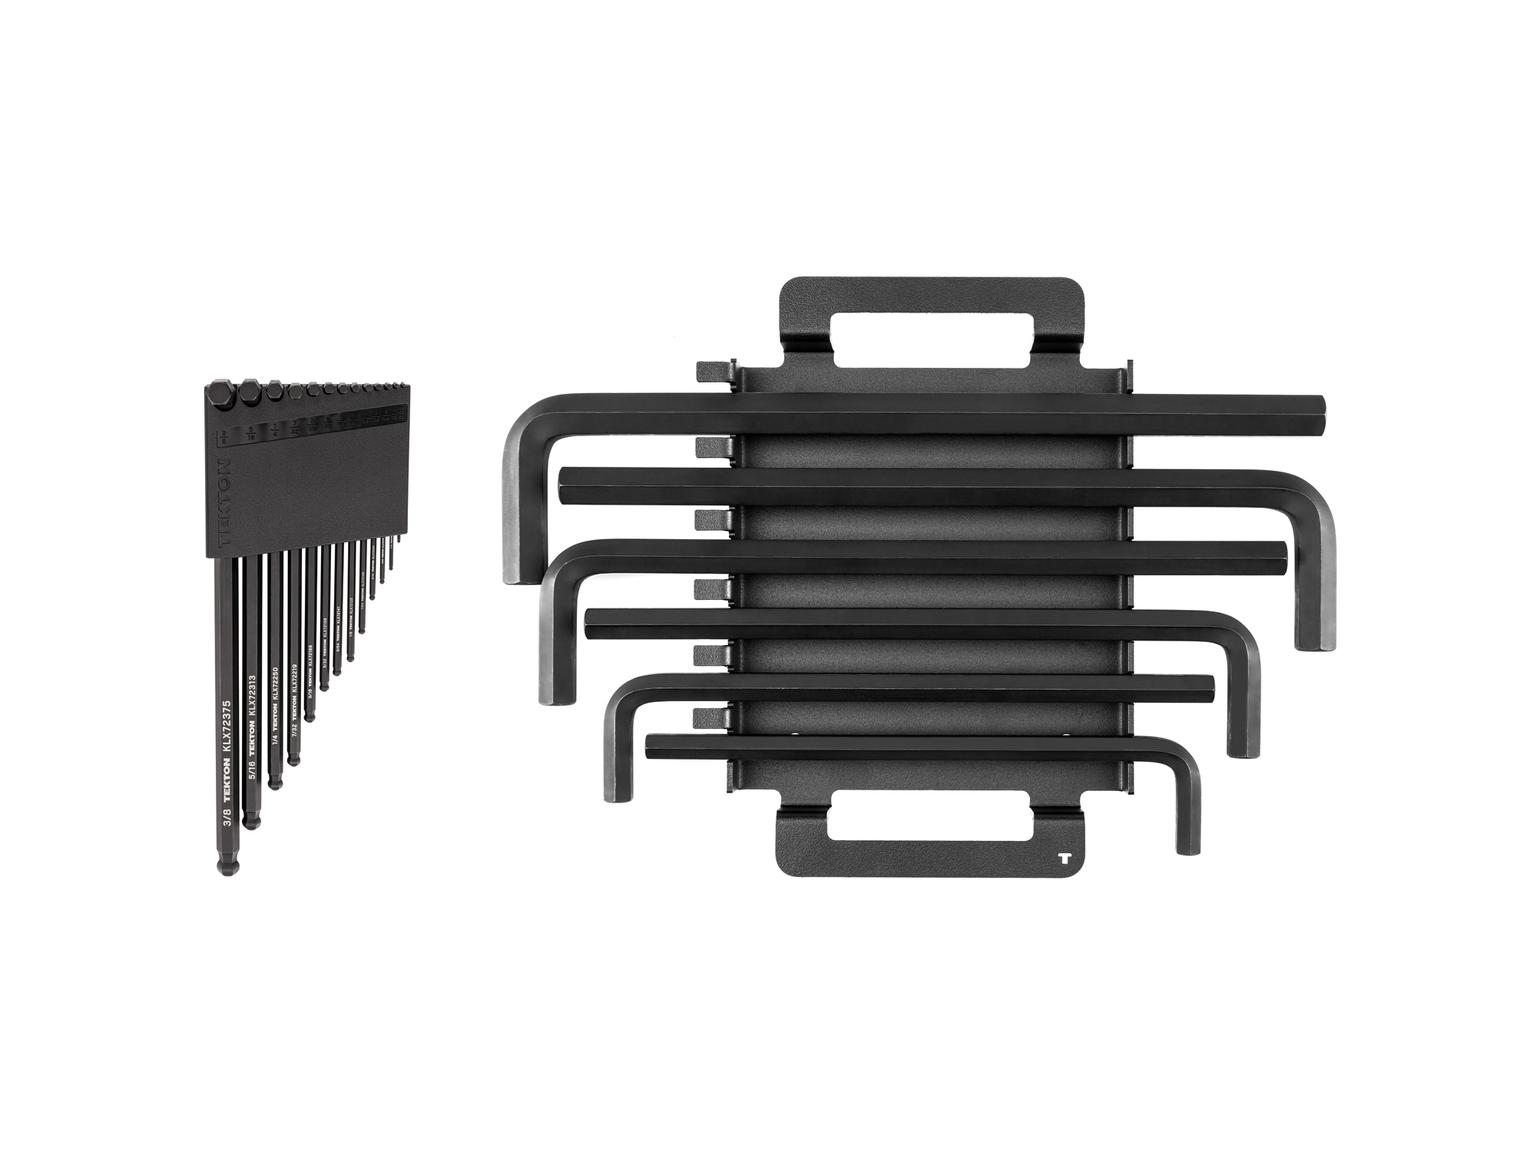 Ball End and Flat End Hex L-Key Set, 19-Piece (Holder and Rack)